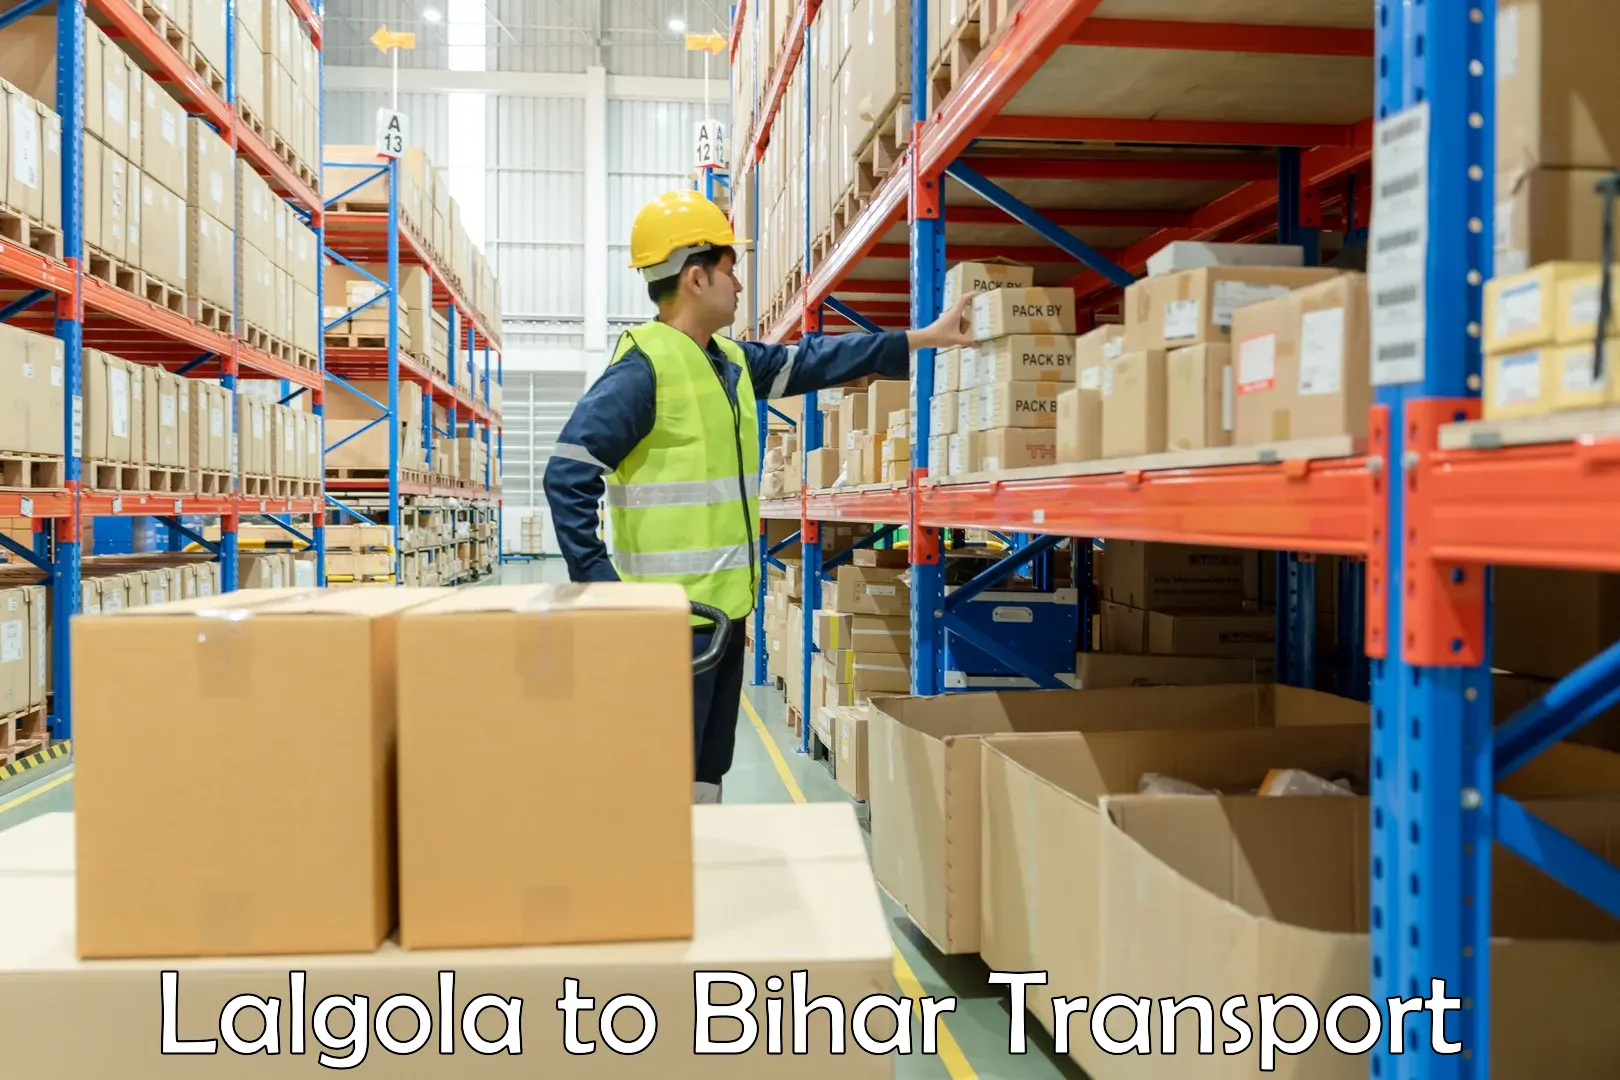 Commercial transport service Lalgola to Dhaka